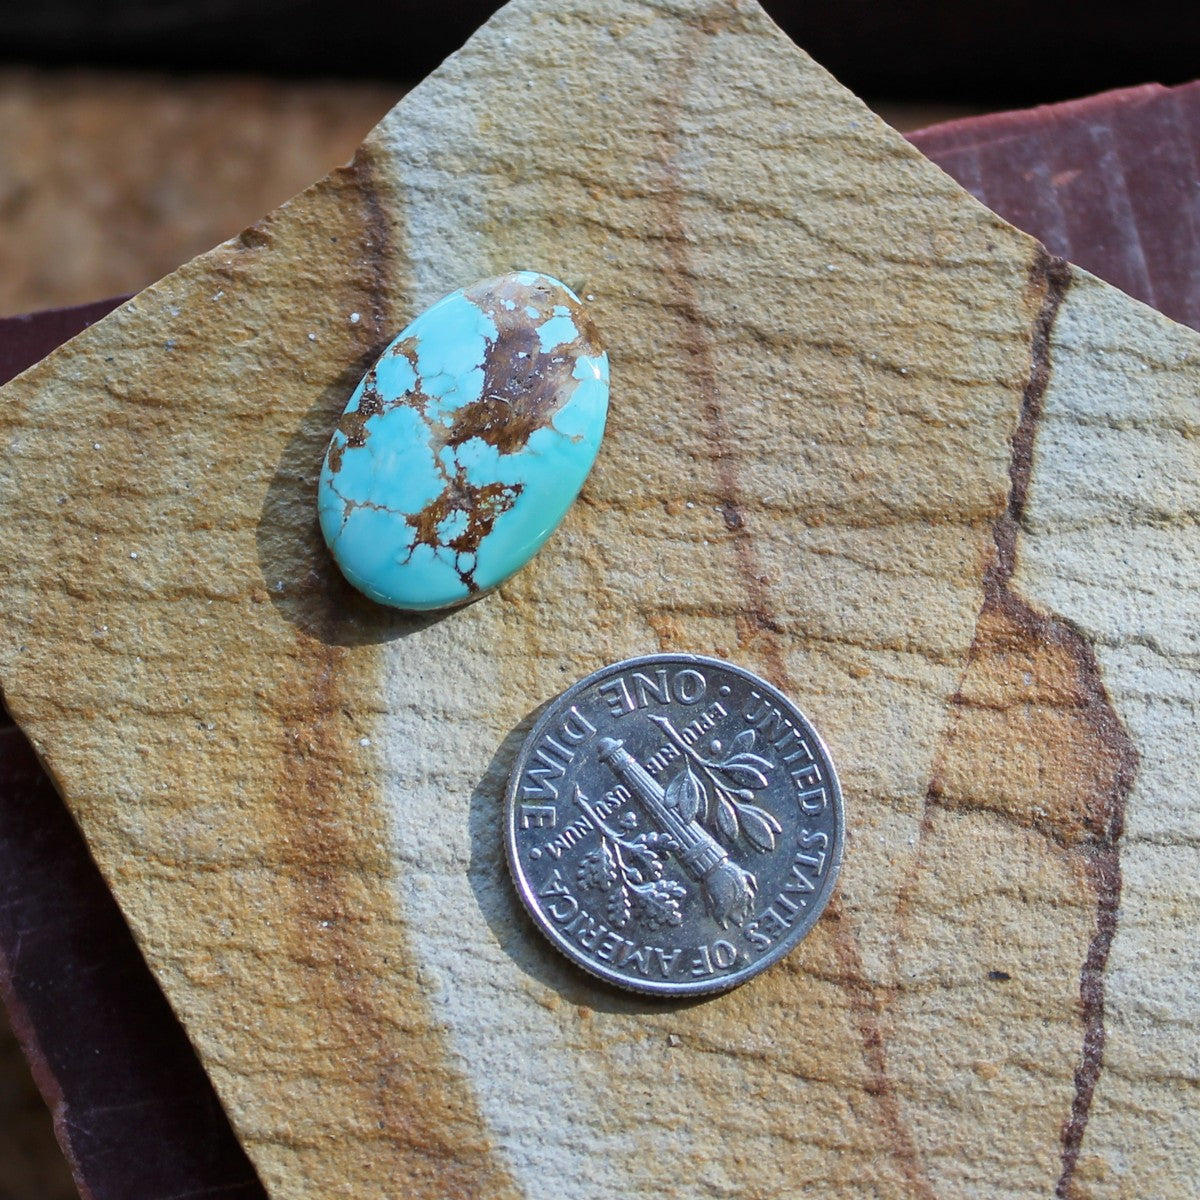 8.5 carat blue Stone Mountain Turquoise cabochon with red matrix